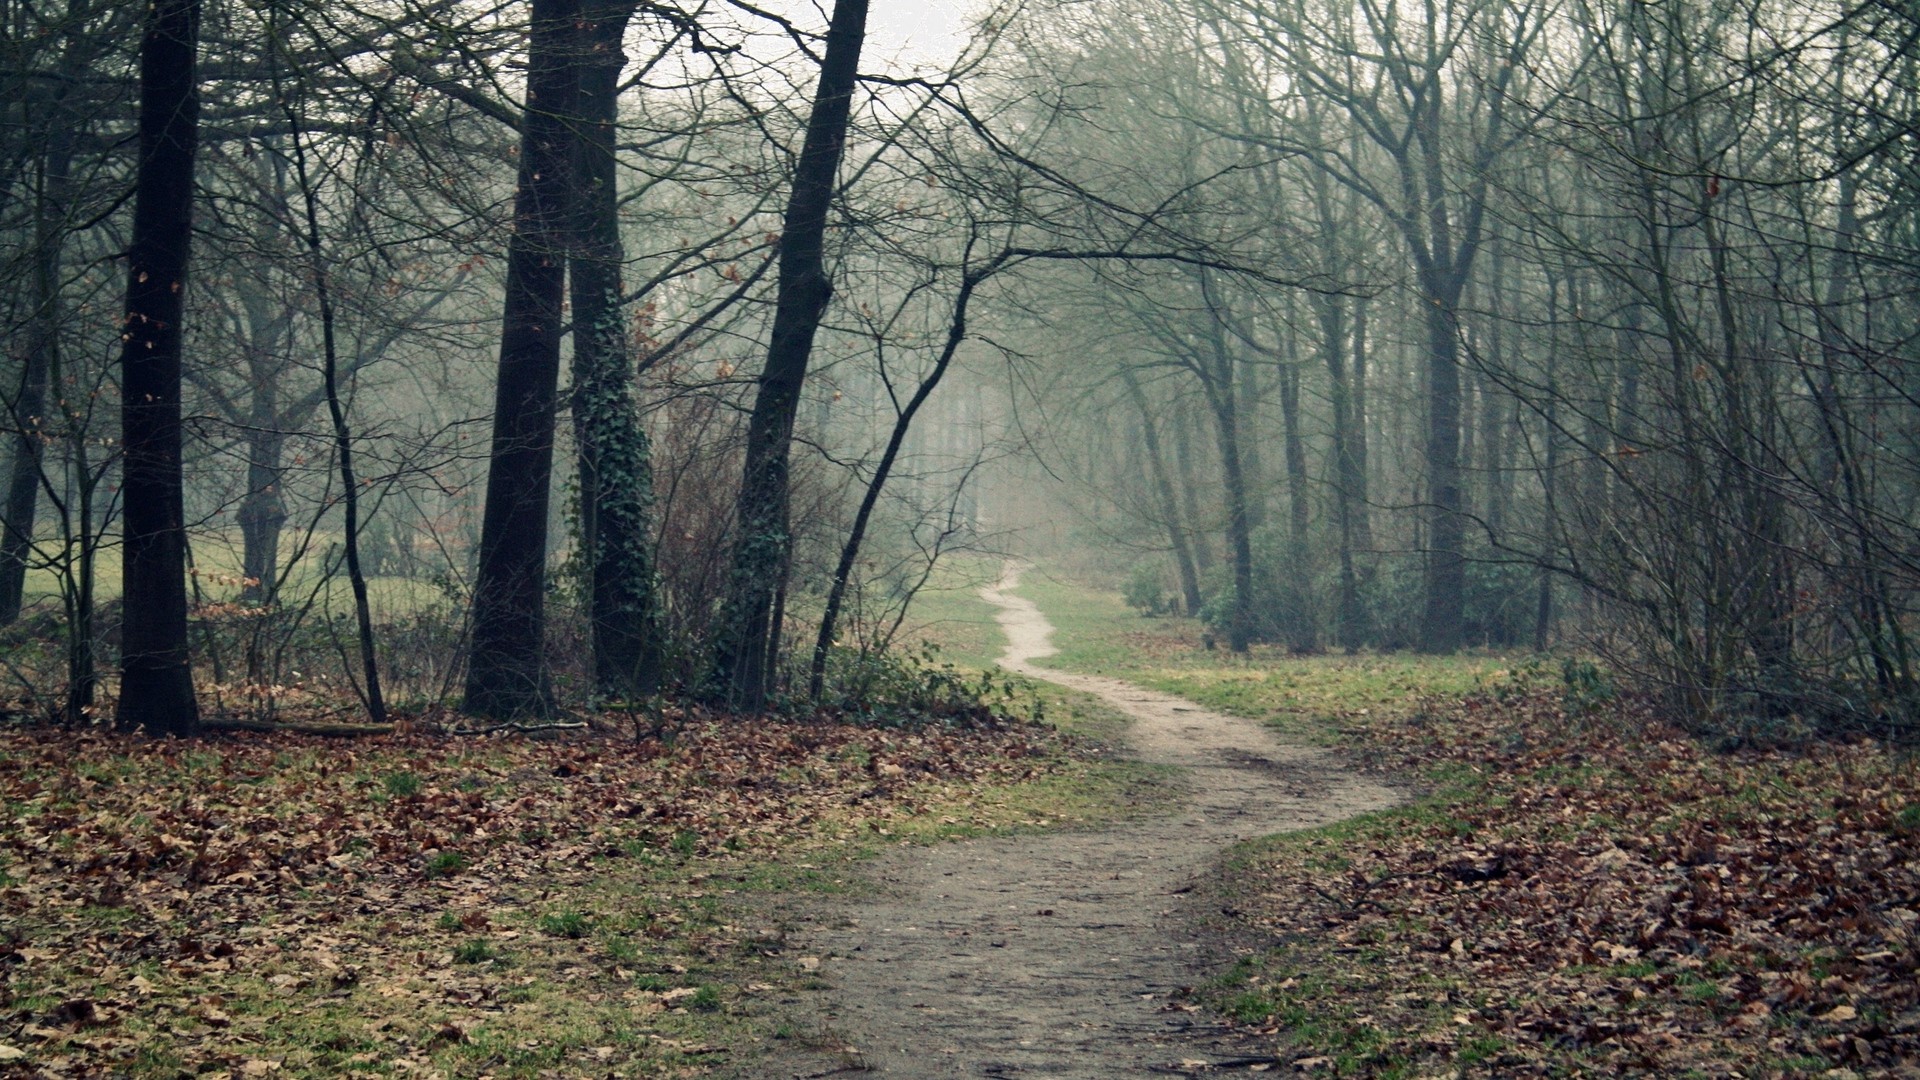 1920x1080 wallpapers: trail, forest, leaves, earth, emptiness, fog, damp (image)